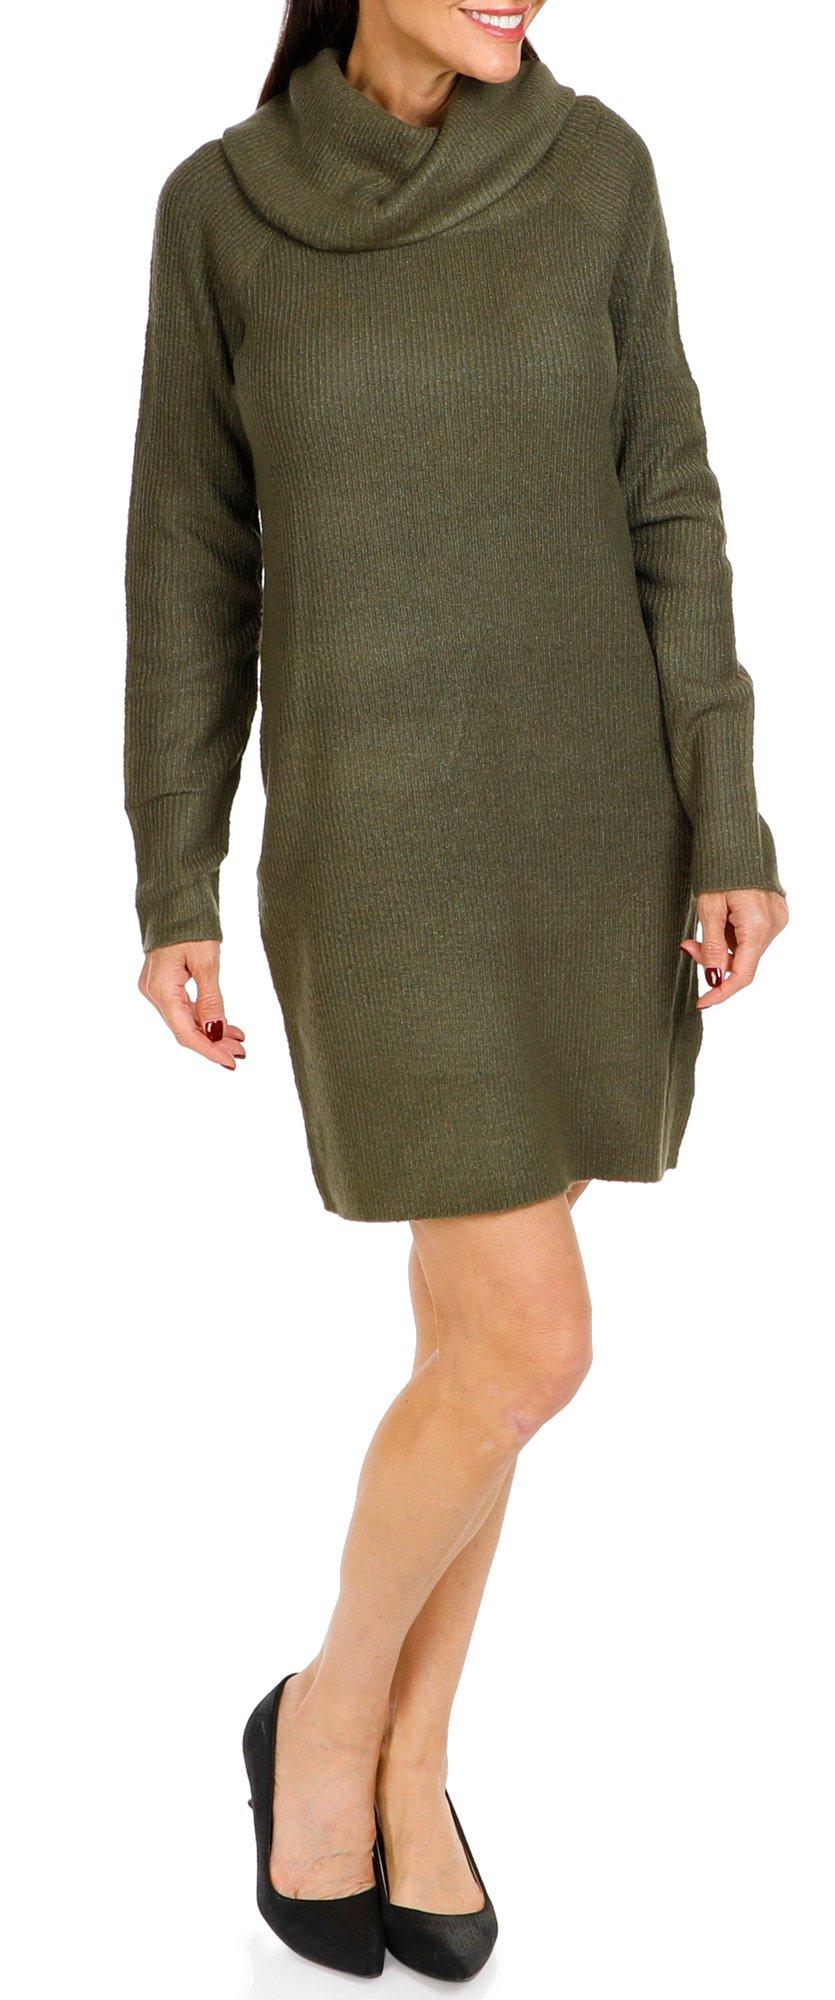 Women's Solid Ribbed Cowl Neck Dress